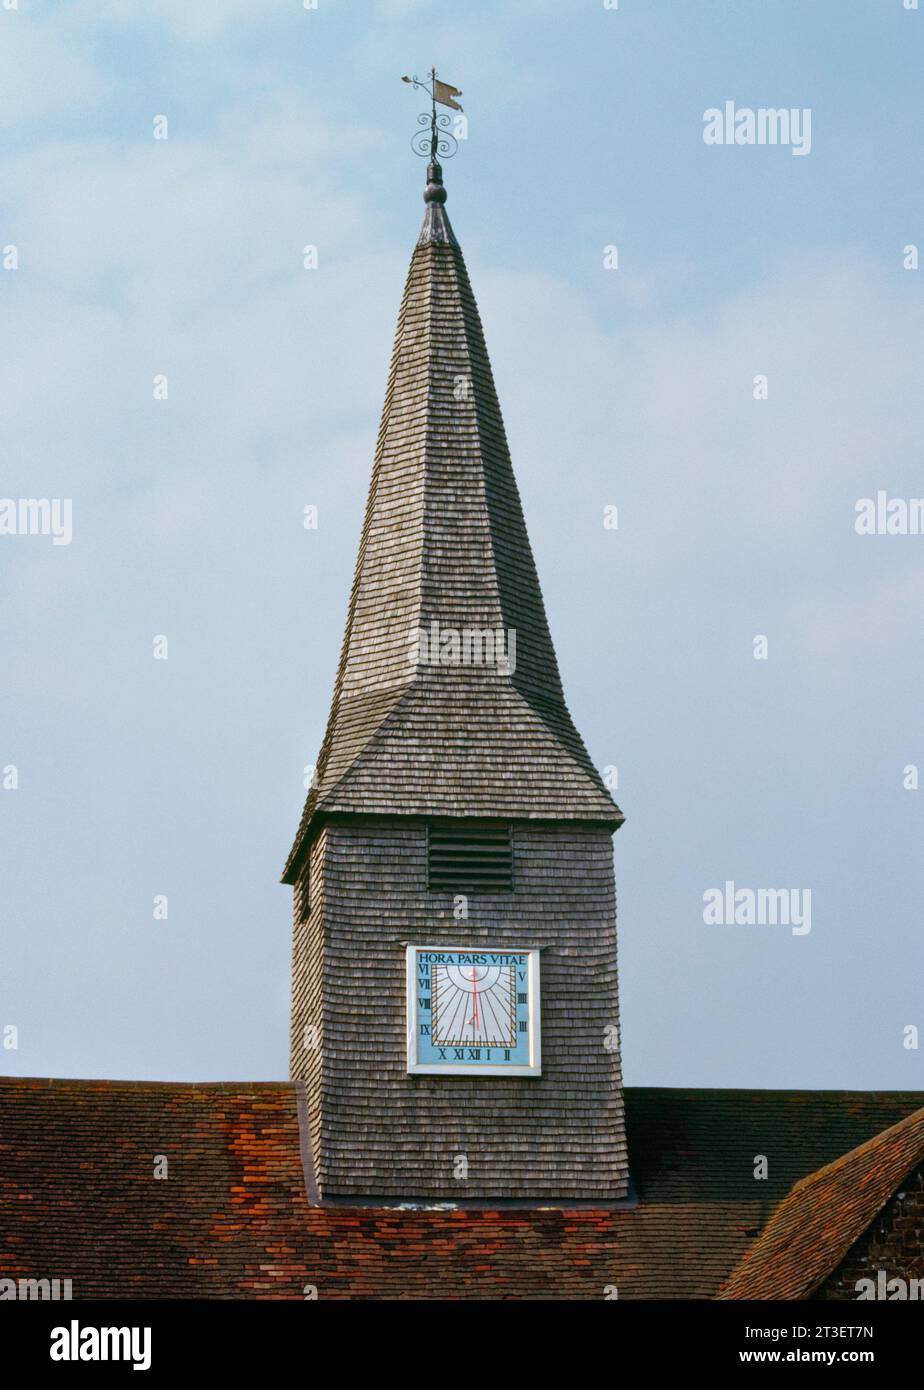 Board sundial on the S face of the bell turret with a broach spire on the tiled roof of St Michael and All Angels' Church, Thursley, Surrey, England. Stock Photo